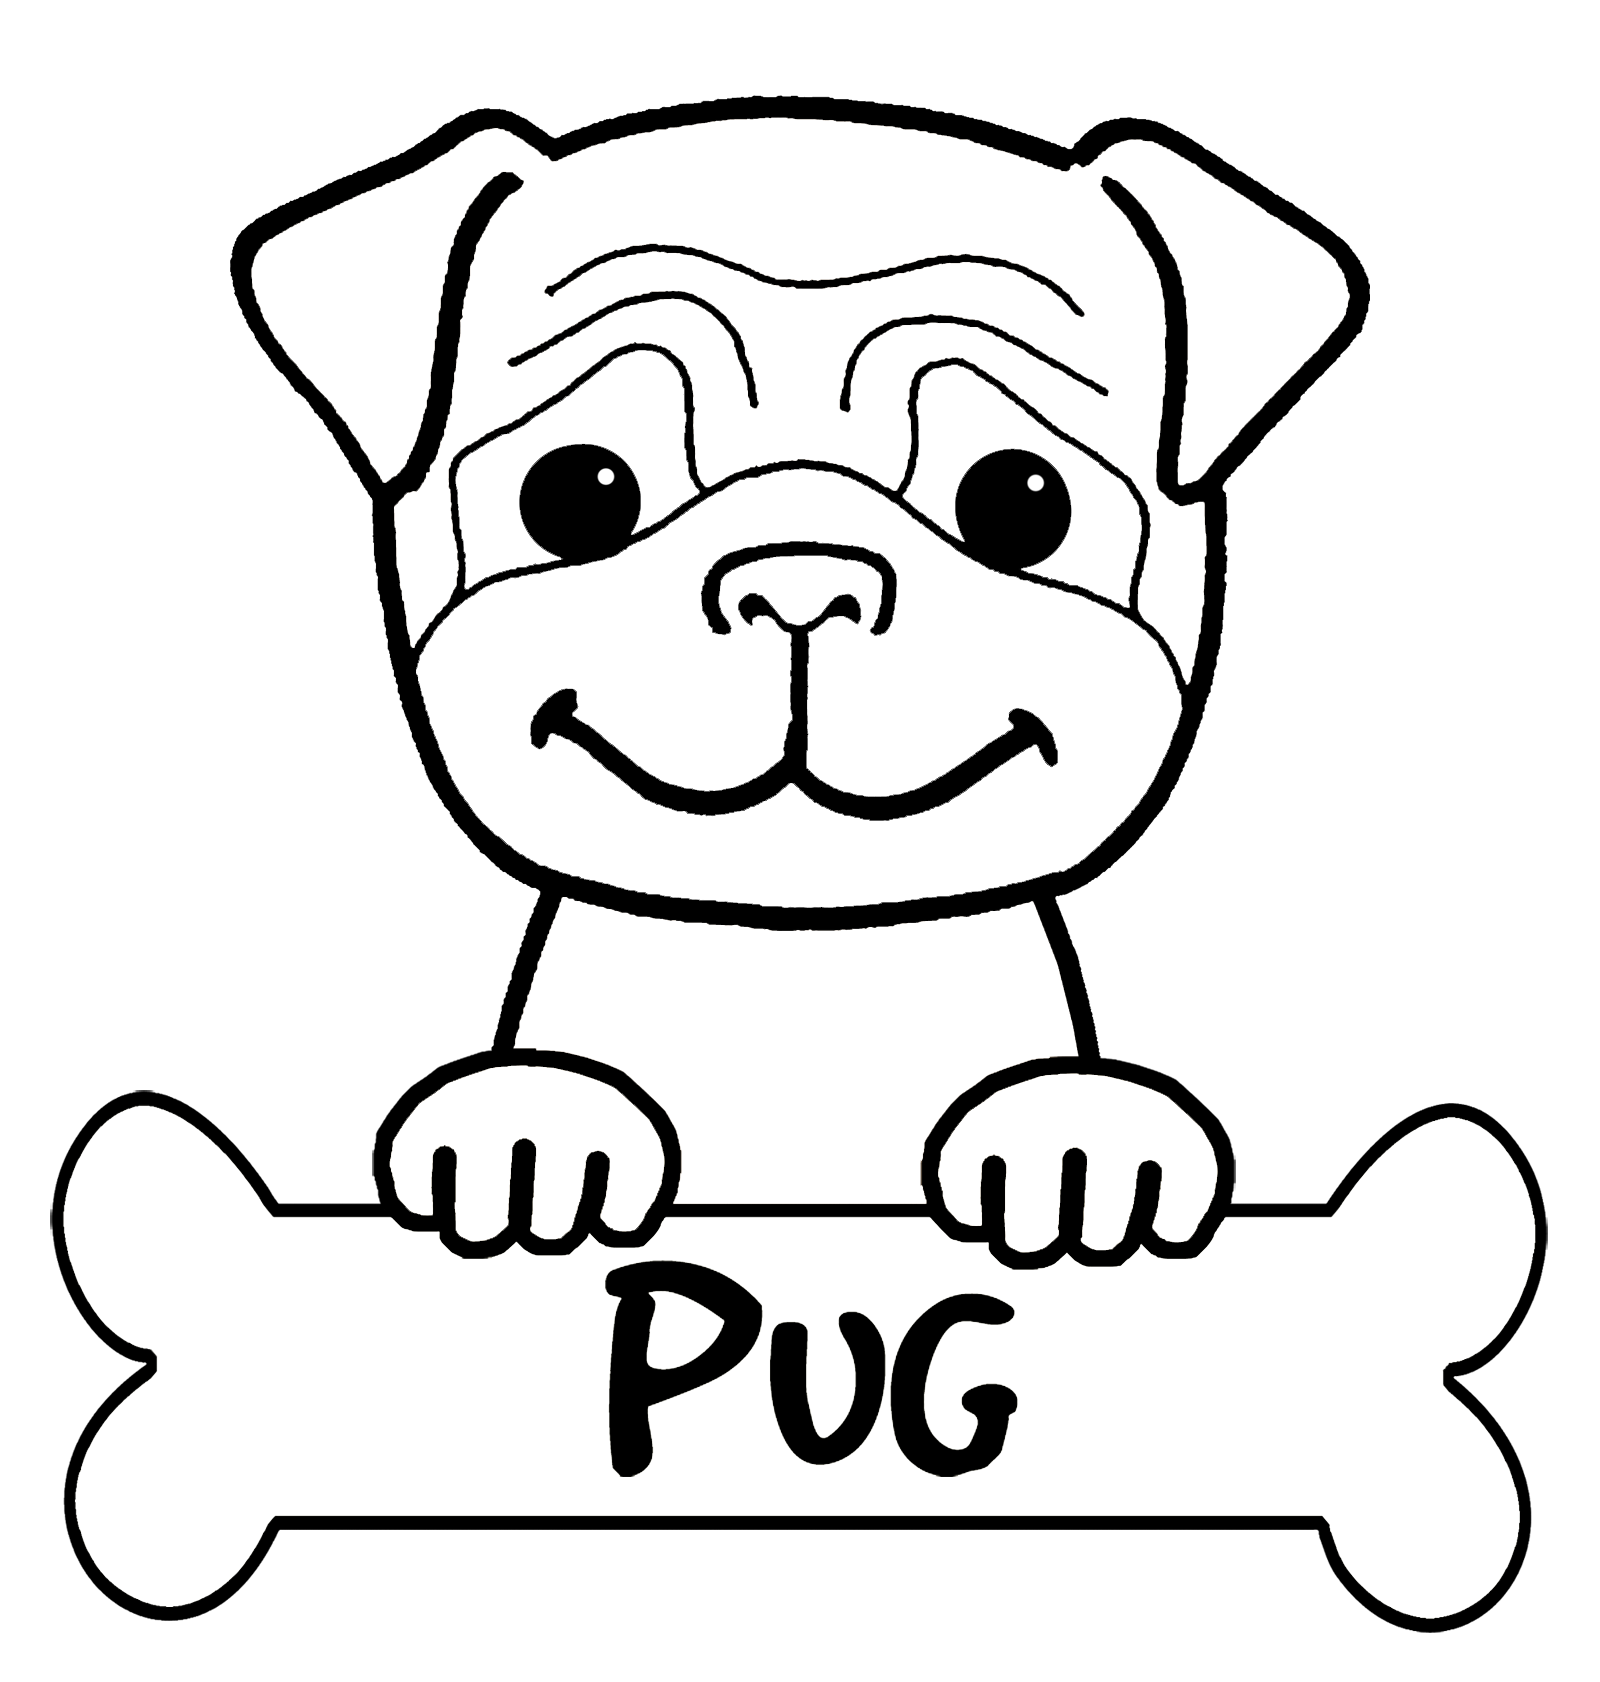 Download Pug Coloring Pages - Best Coloring Pages For Kids